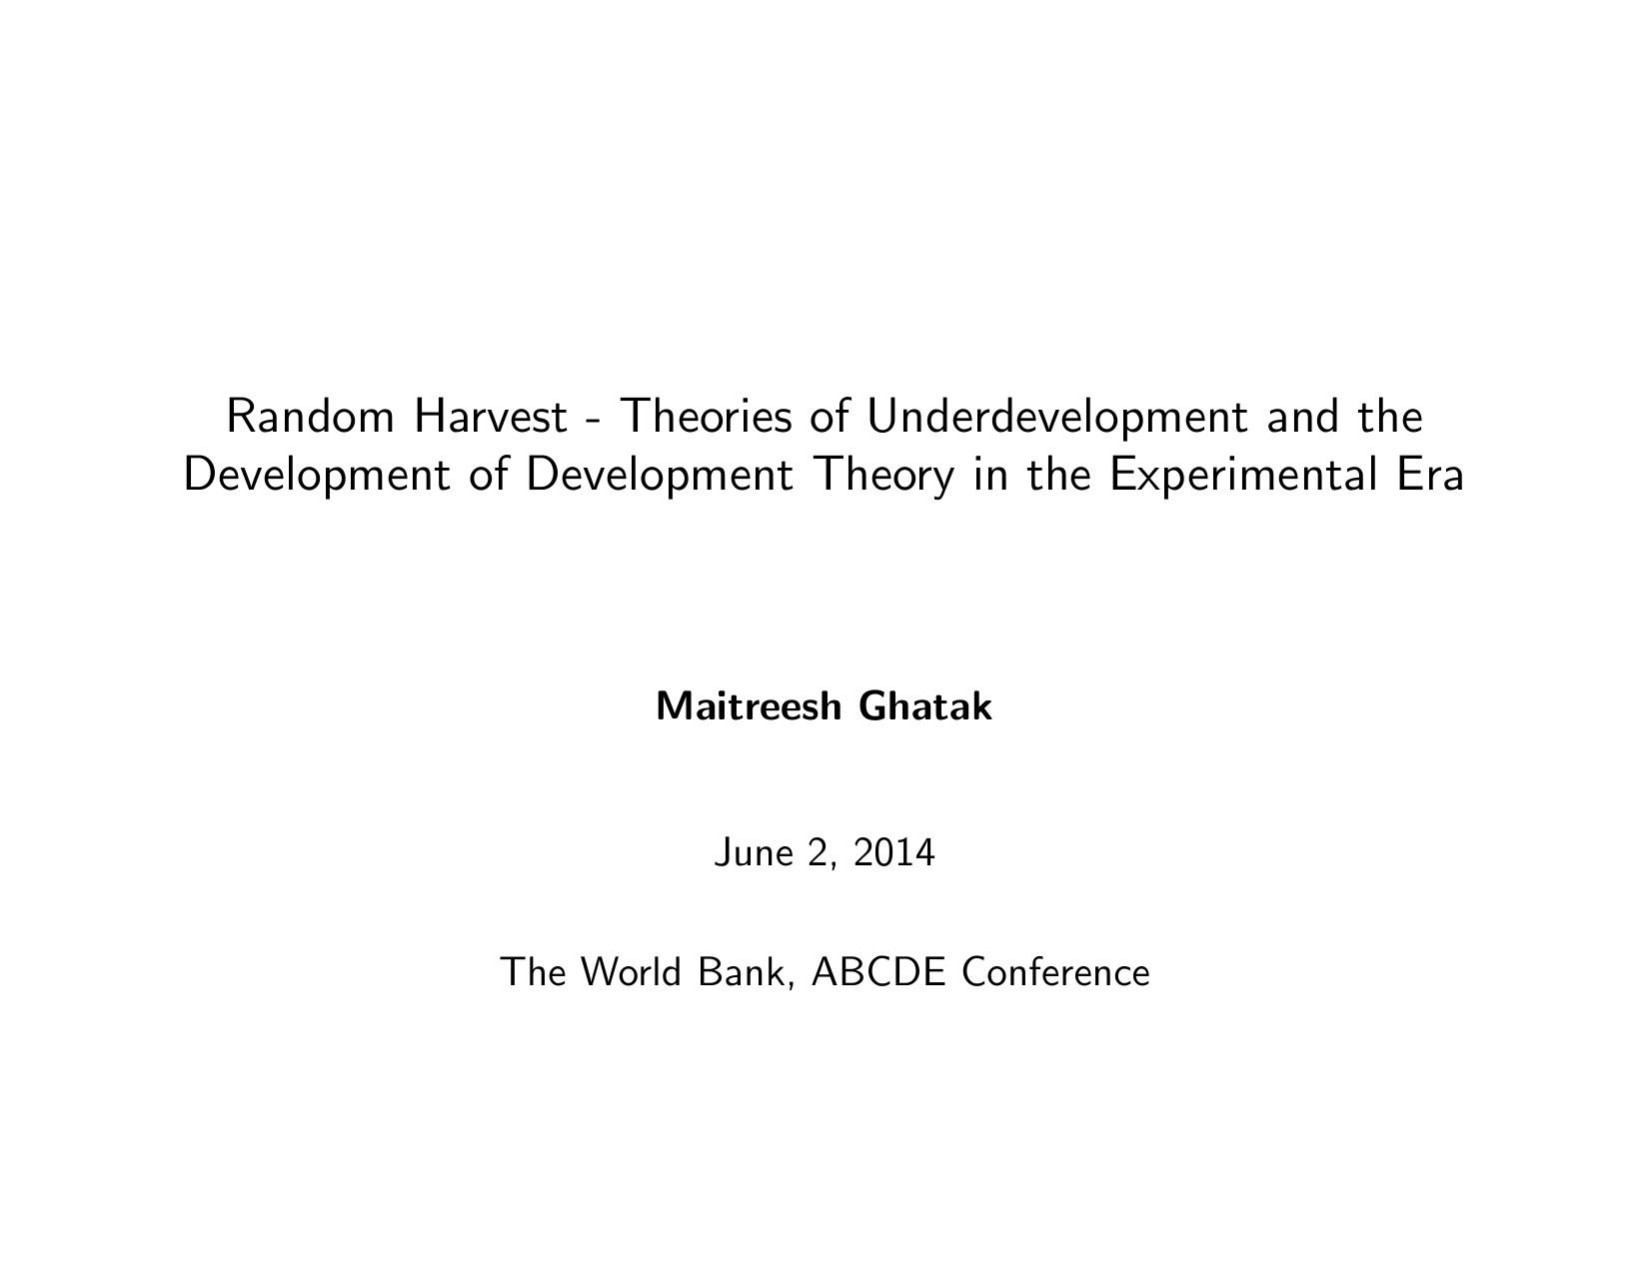 Theories of Underdevelopment and the and the Development of Development Theory